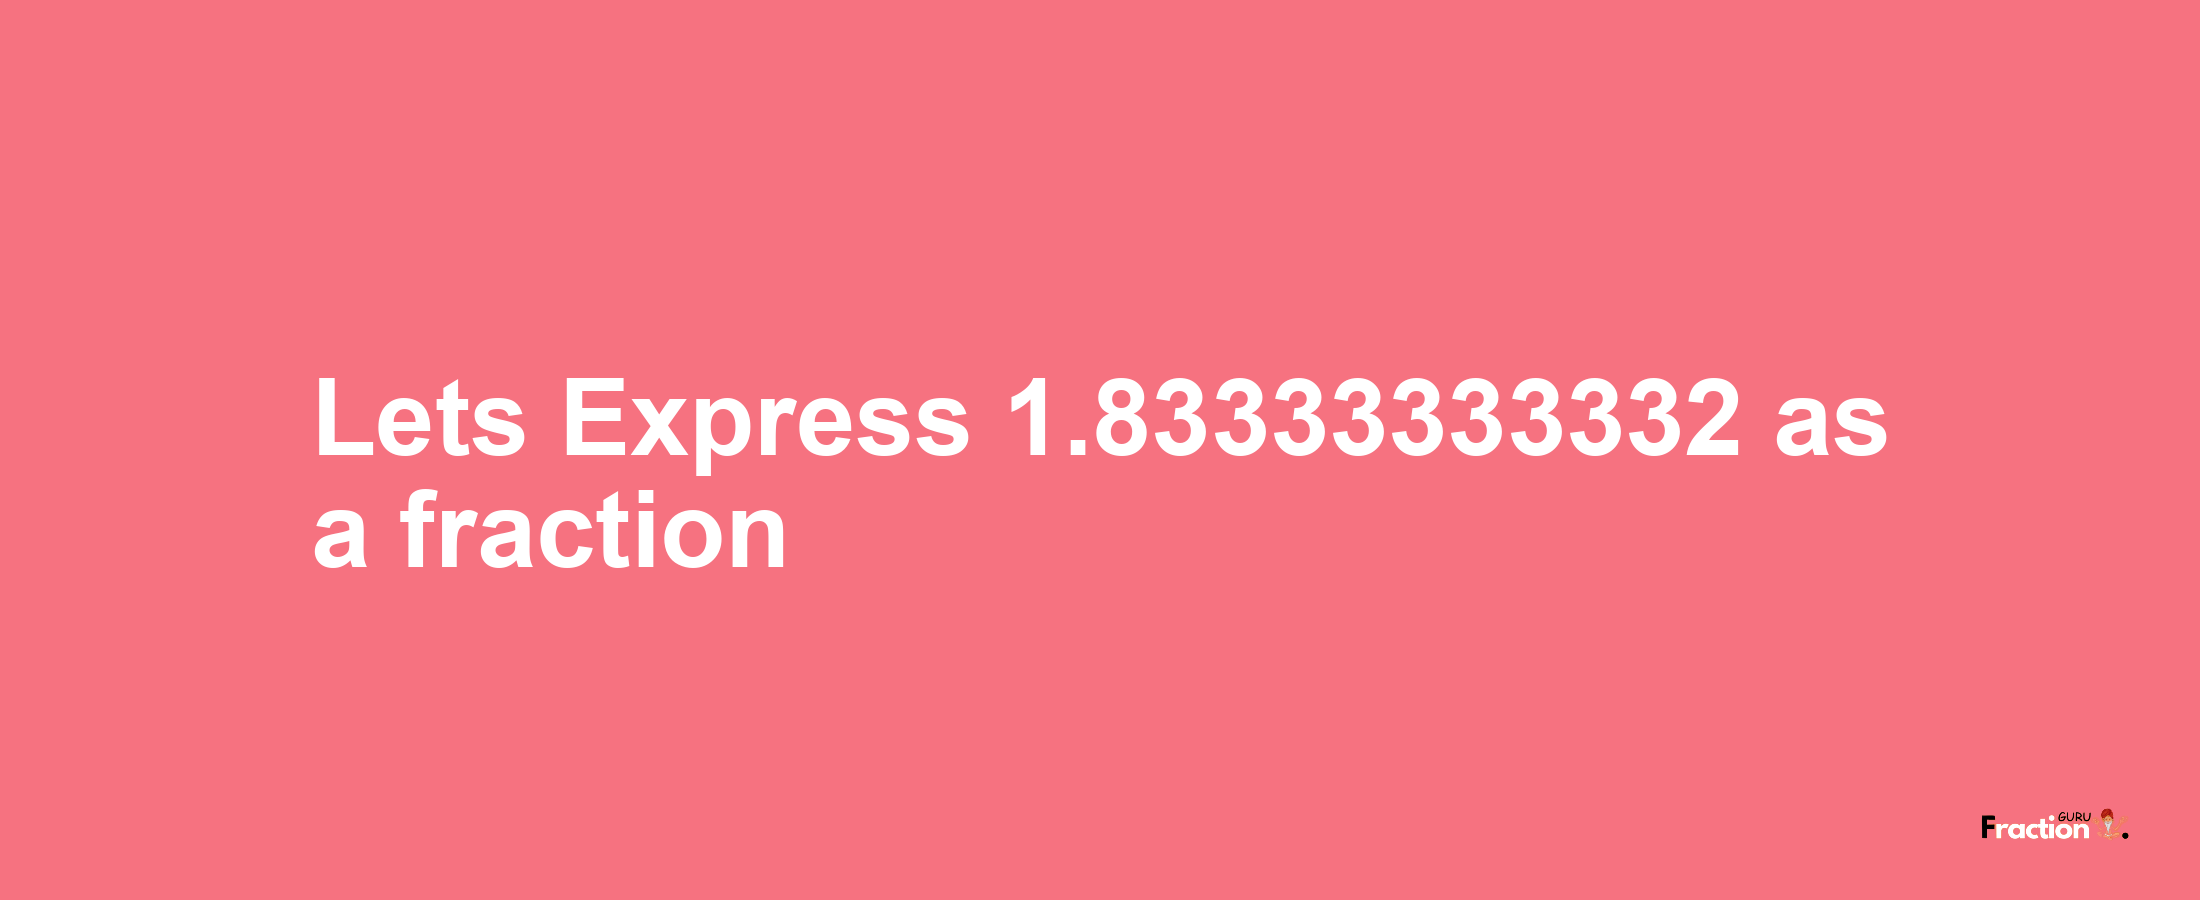 Lets Express 1.83333333332 as afraction